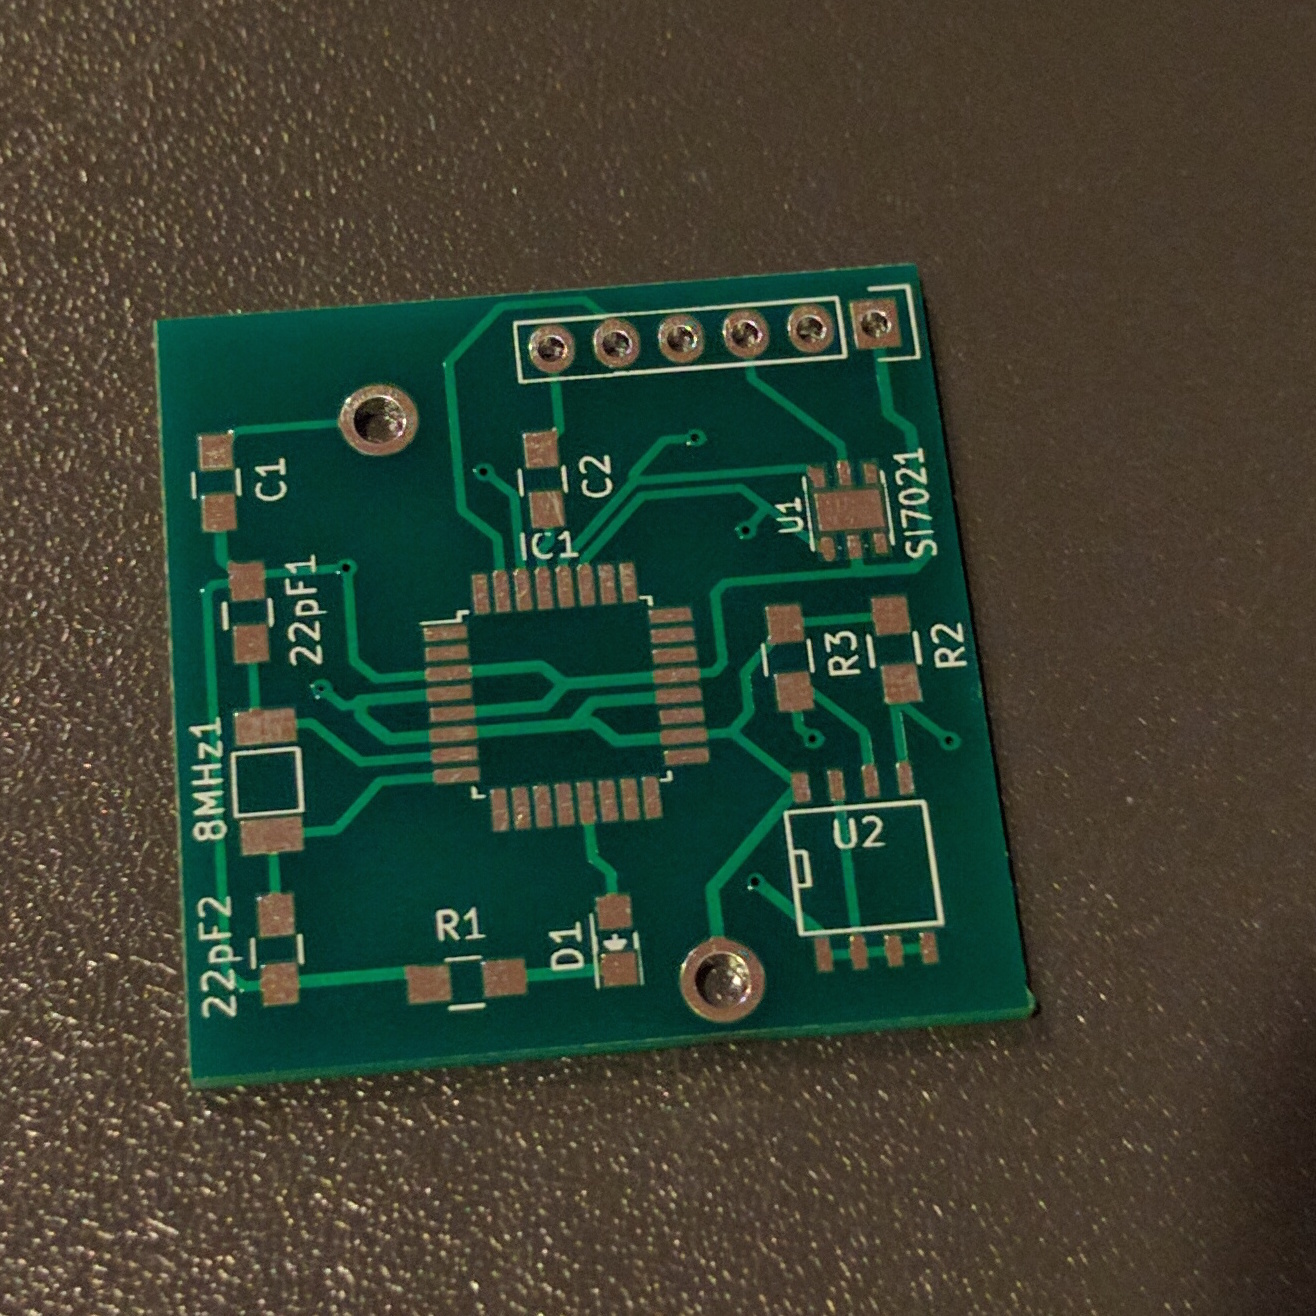 The Manufacturer's PCB